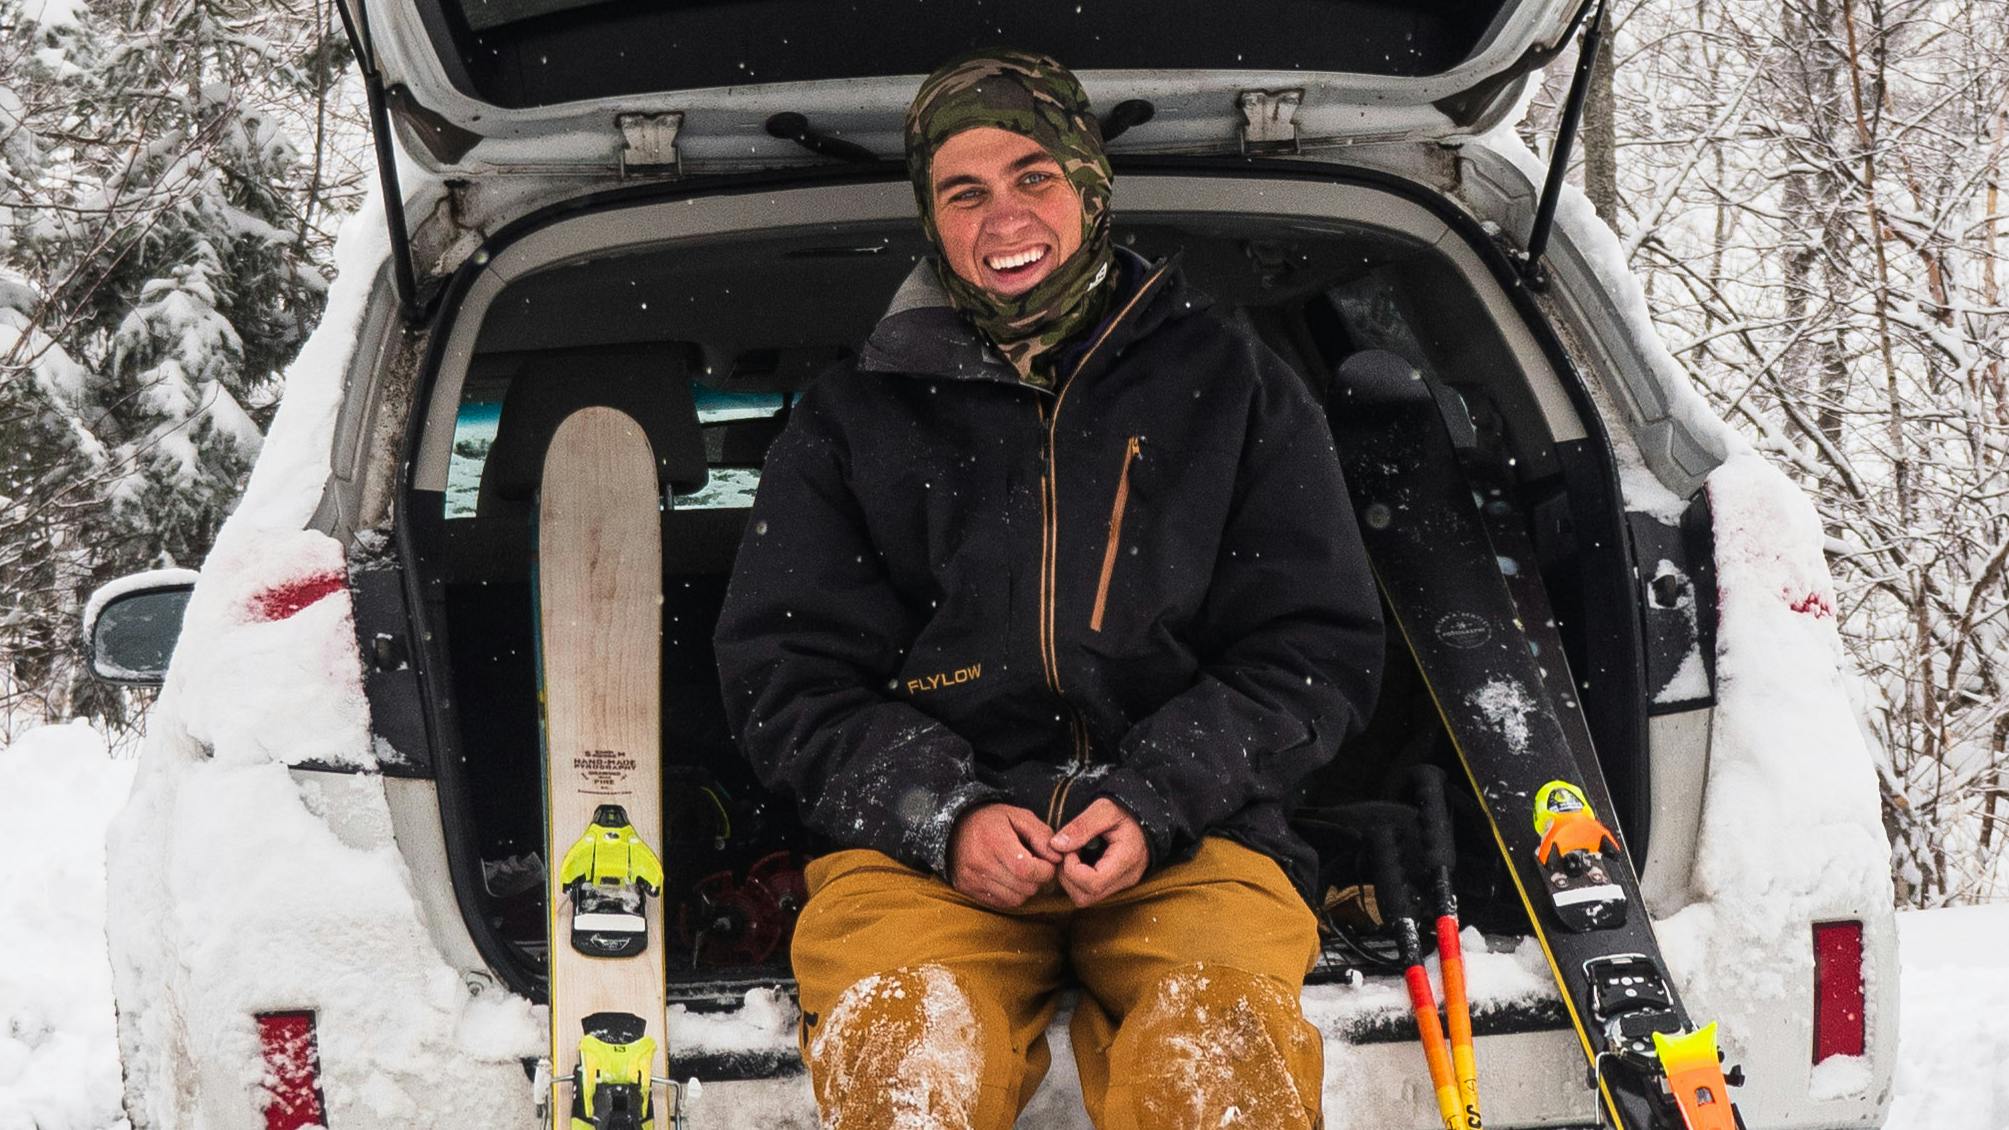 Curated expert Chris Goodhue sitting with two pairs of skis in the back of his van